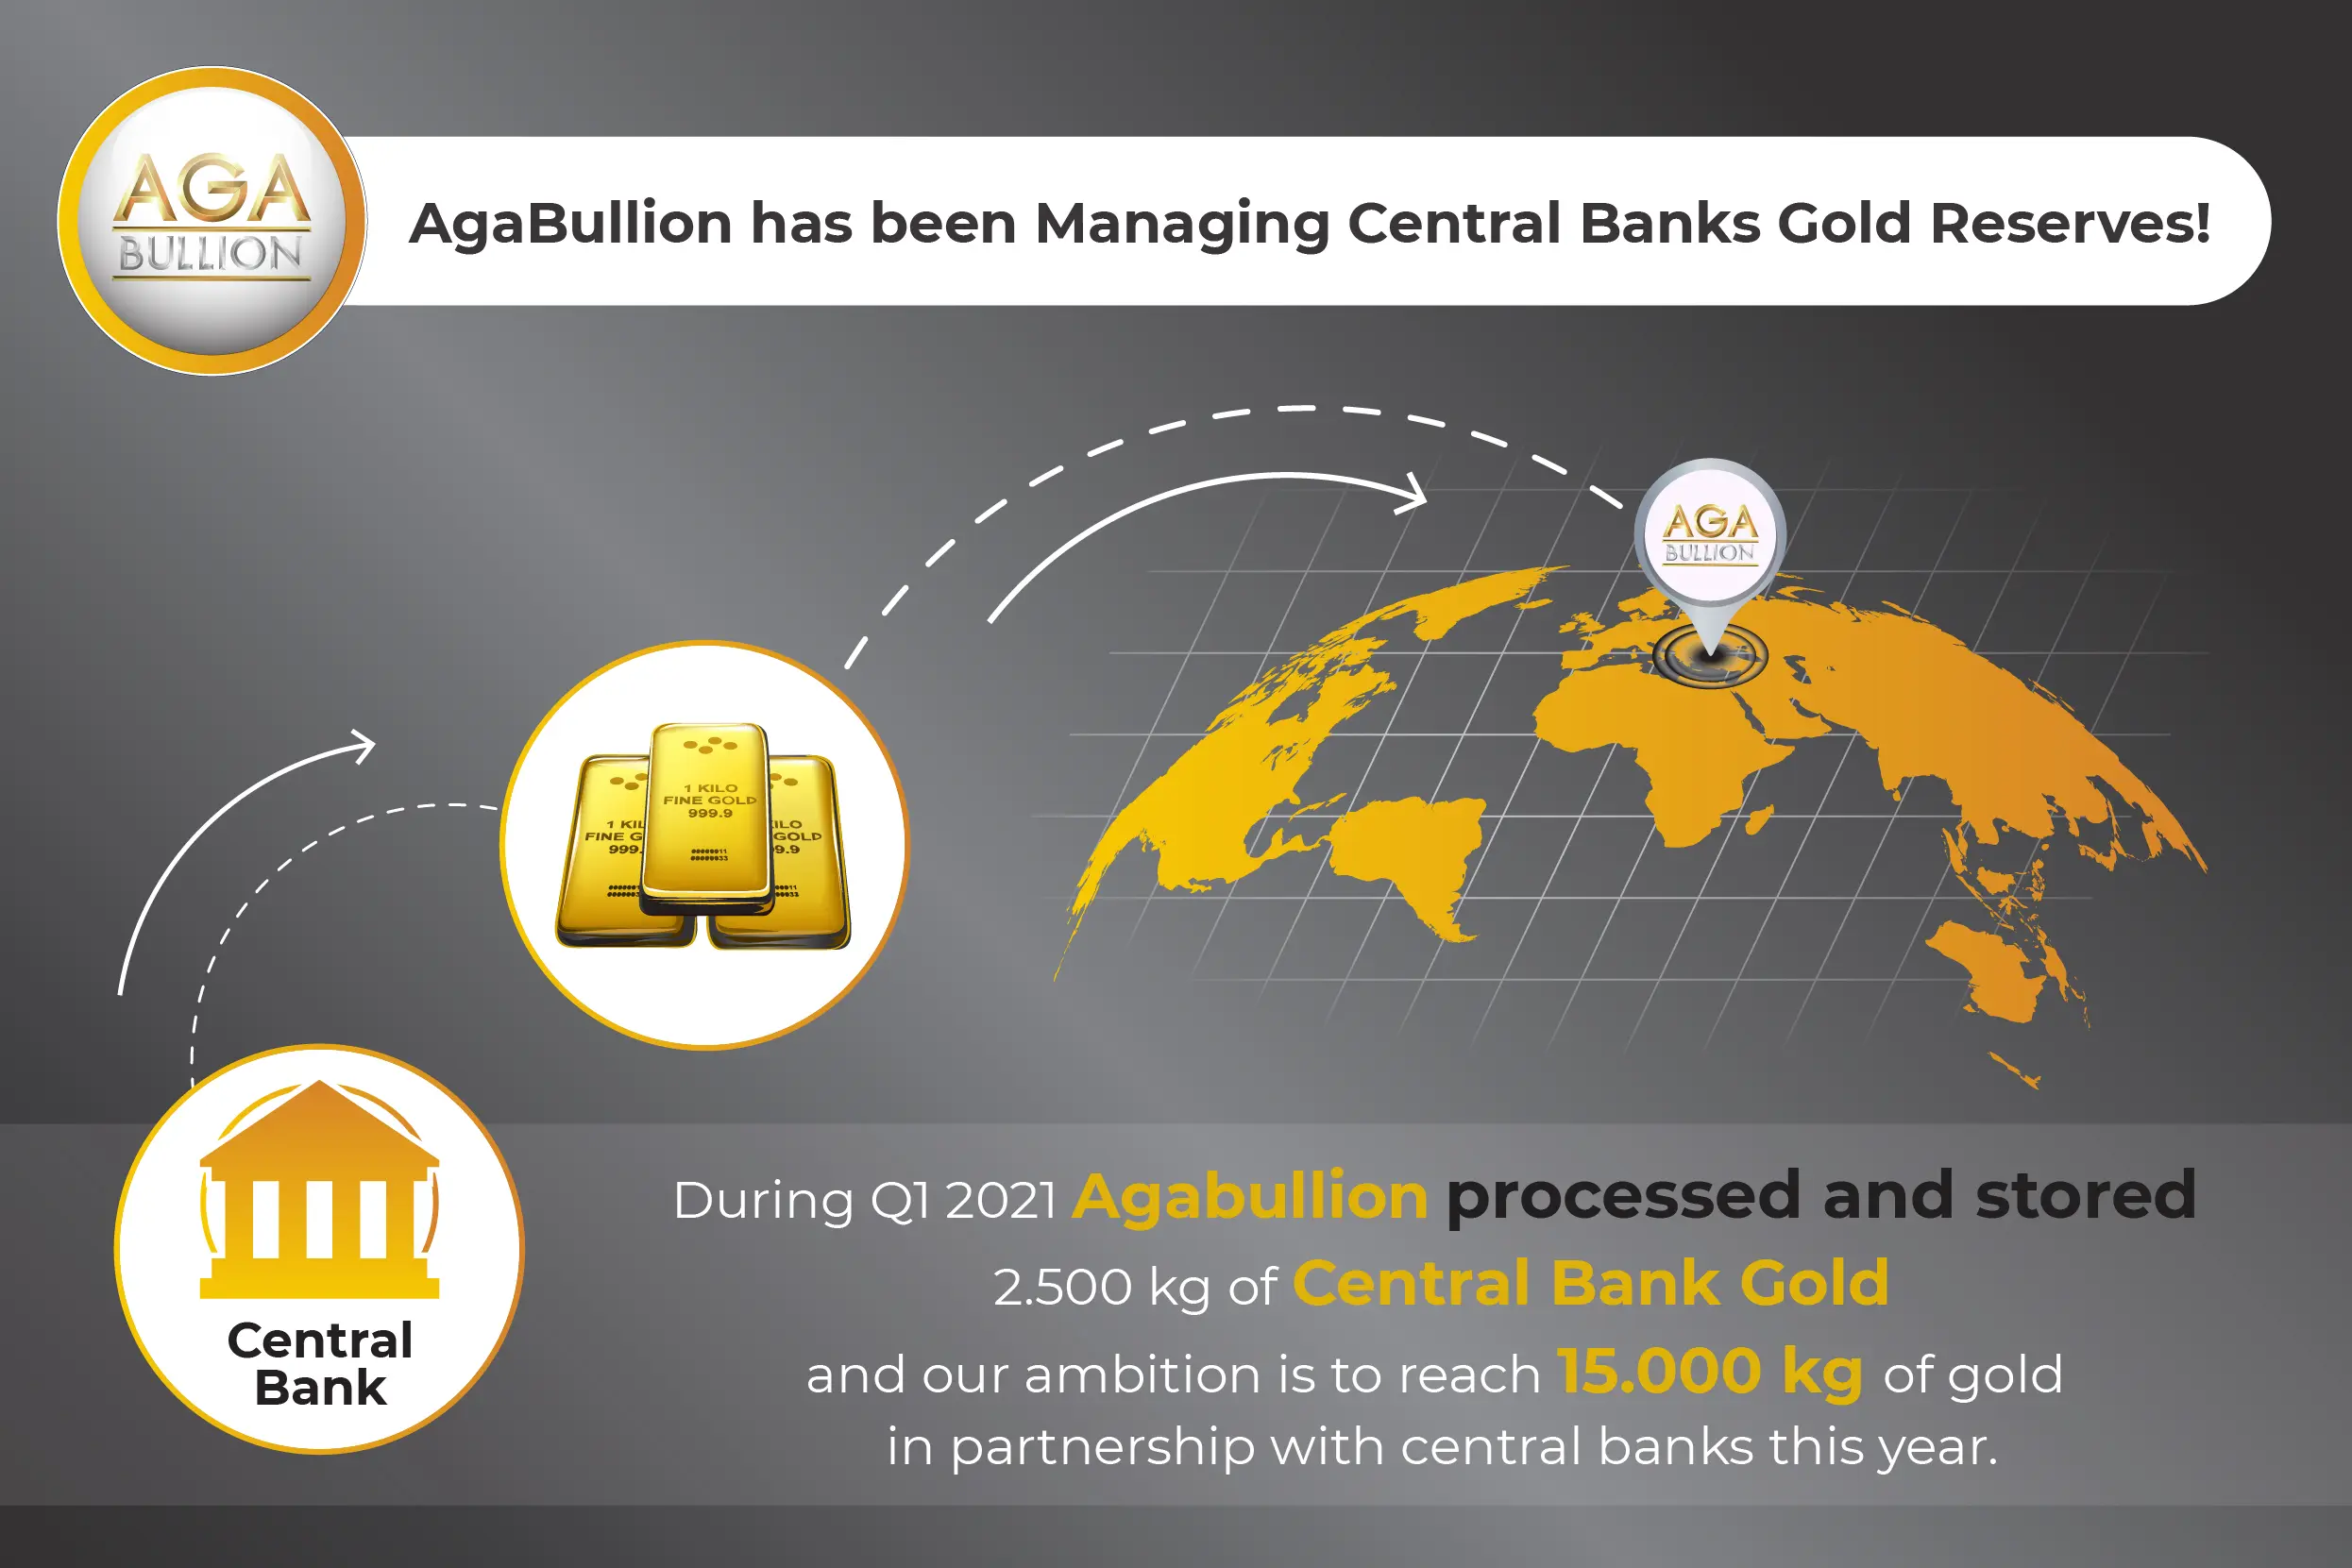 AgaBullion has been Managing Central Banks Gold Reserves!